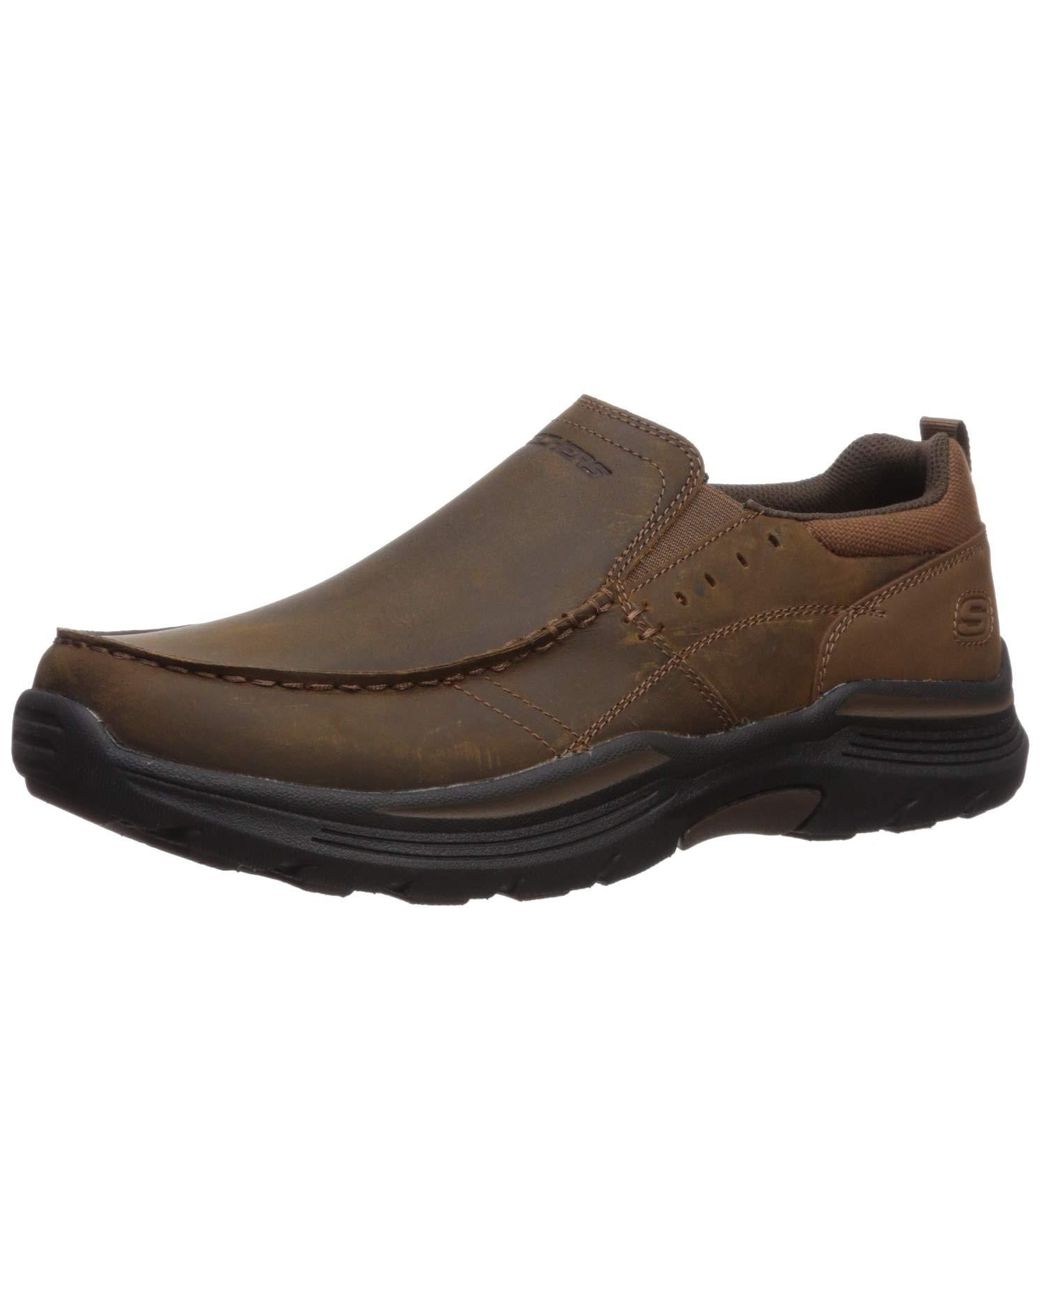 Skechers Expended-sevenoleather Leather Slip On Moccasin in Dark Brown ...